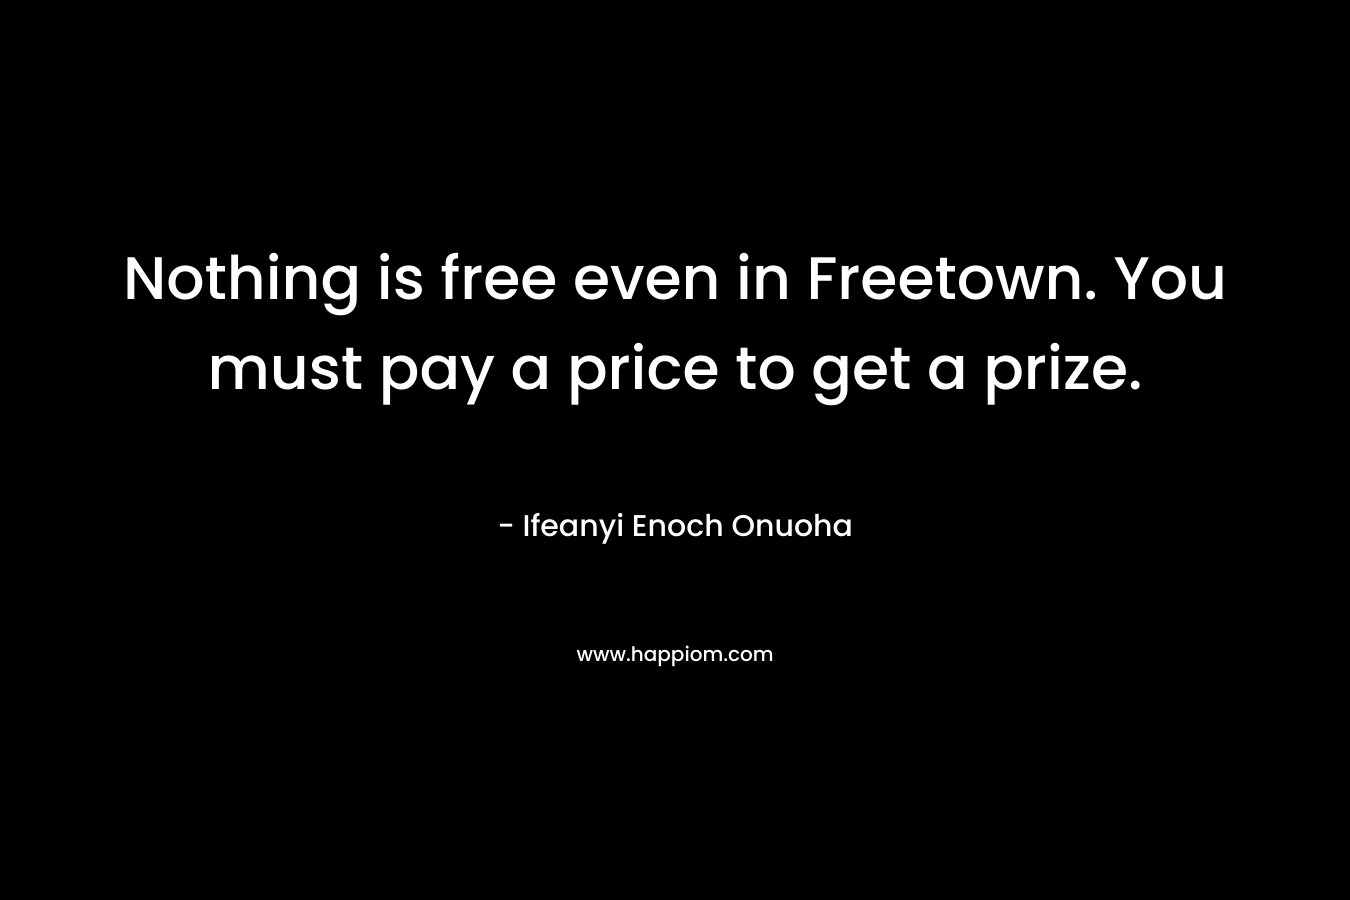 Nothing is free even in Freetown. You must pay a price to get a prize. – Ifeanyi Enoch Onuoha